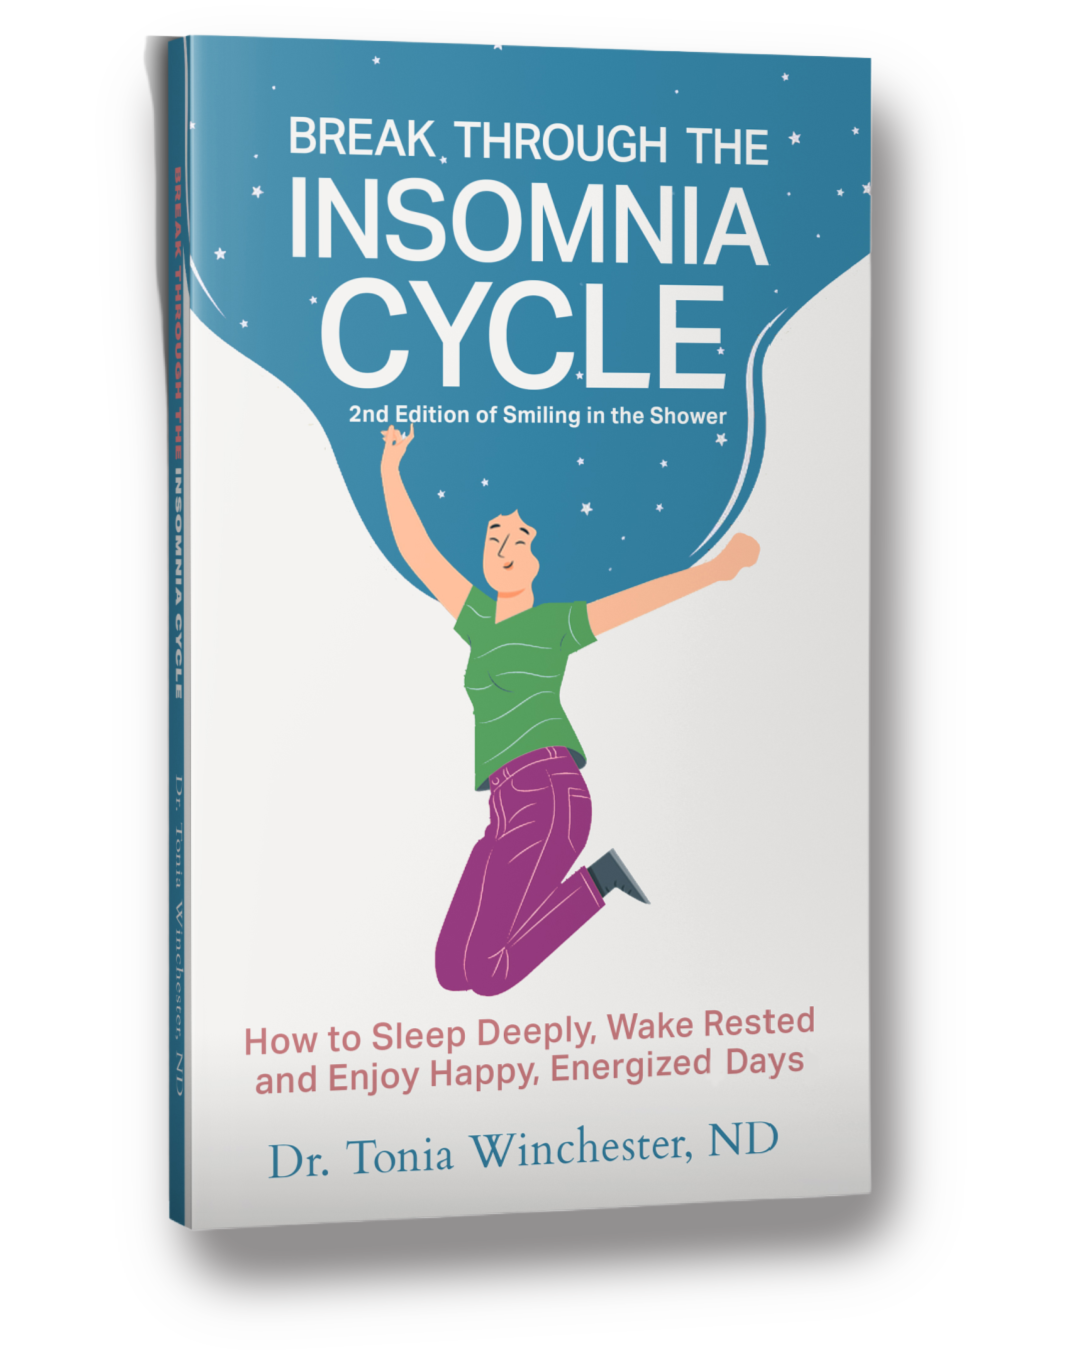 break through the insomnia cycle by dr. tonia winchester